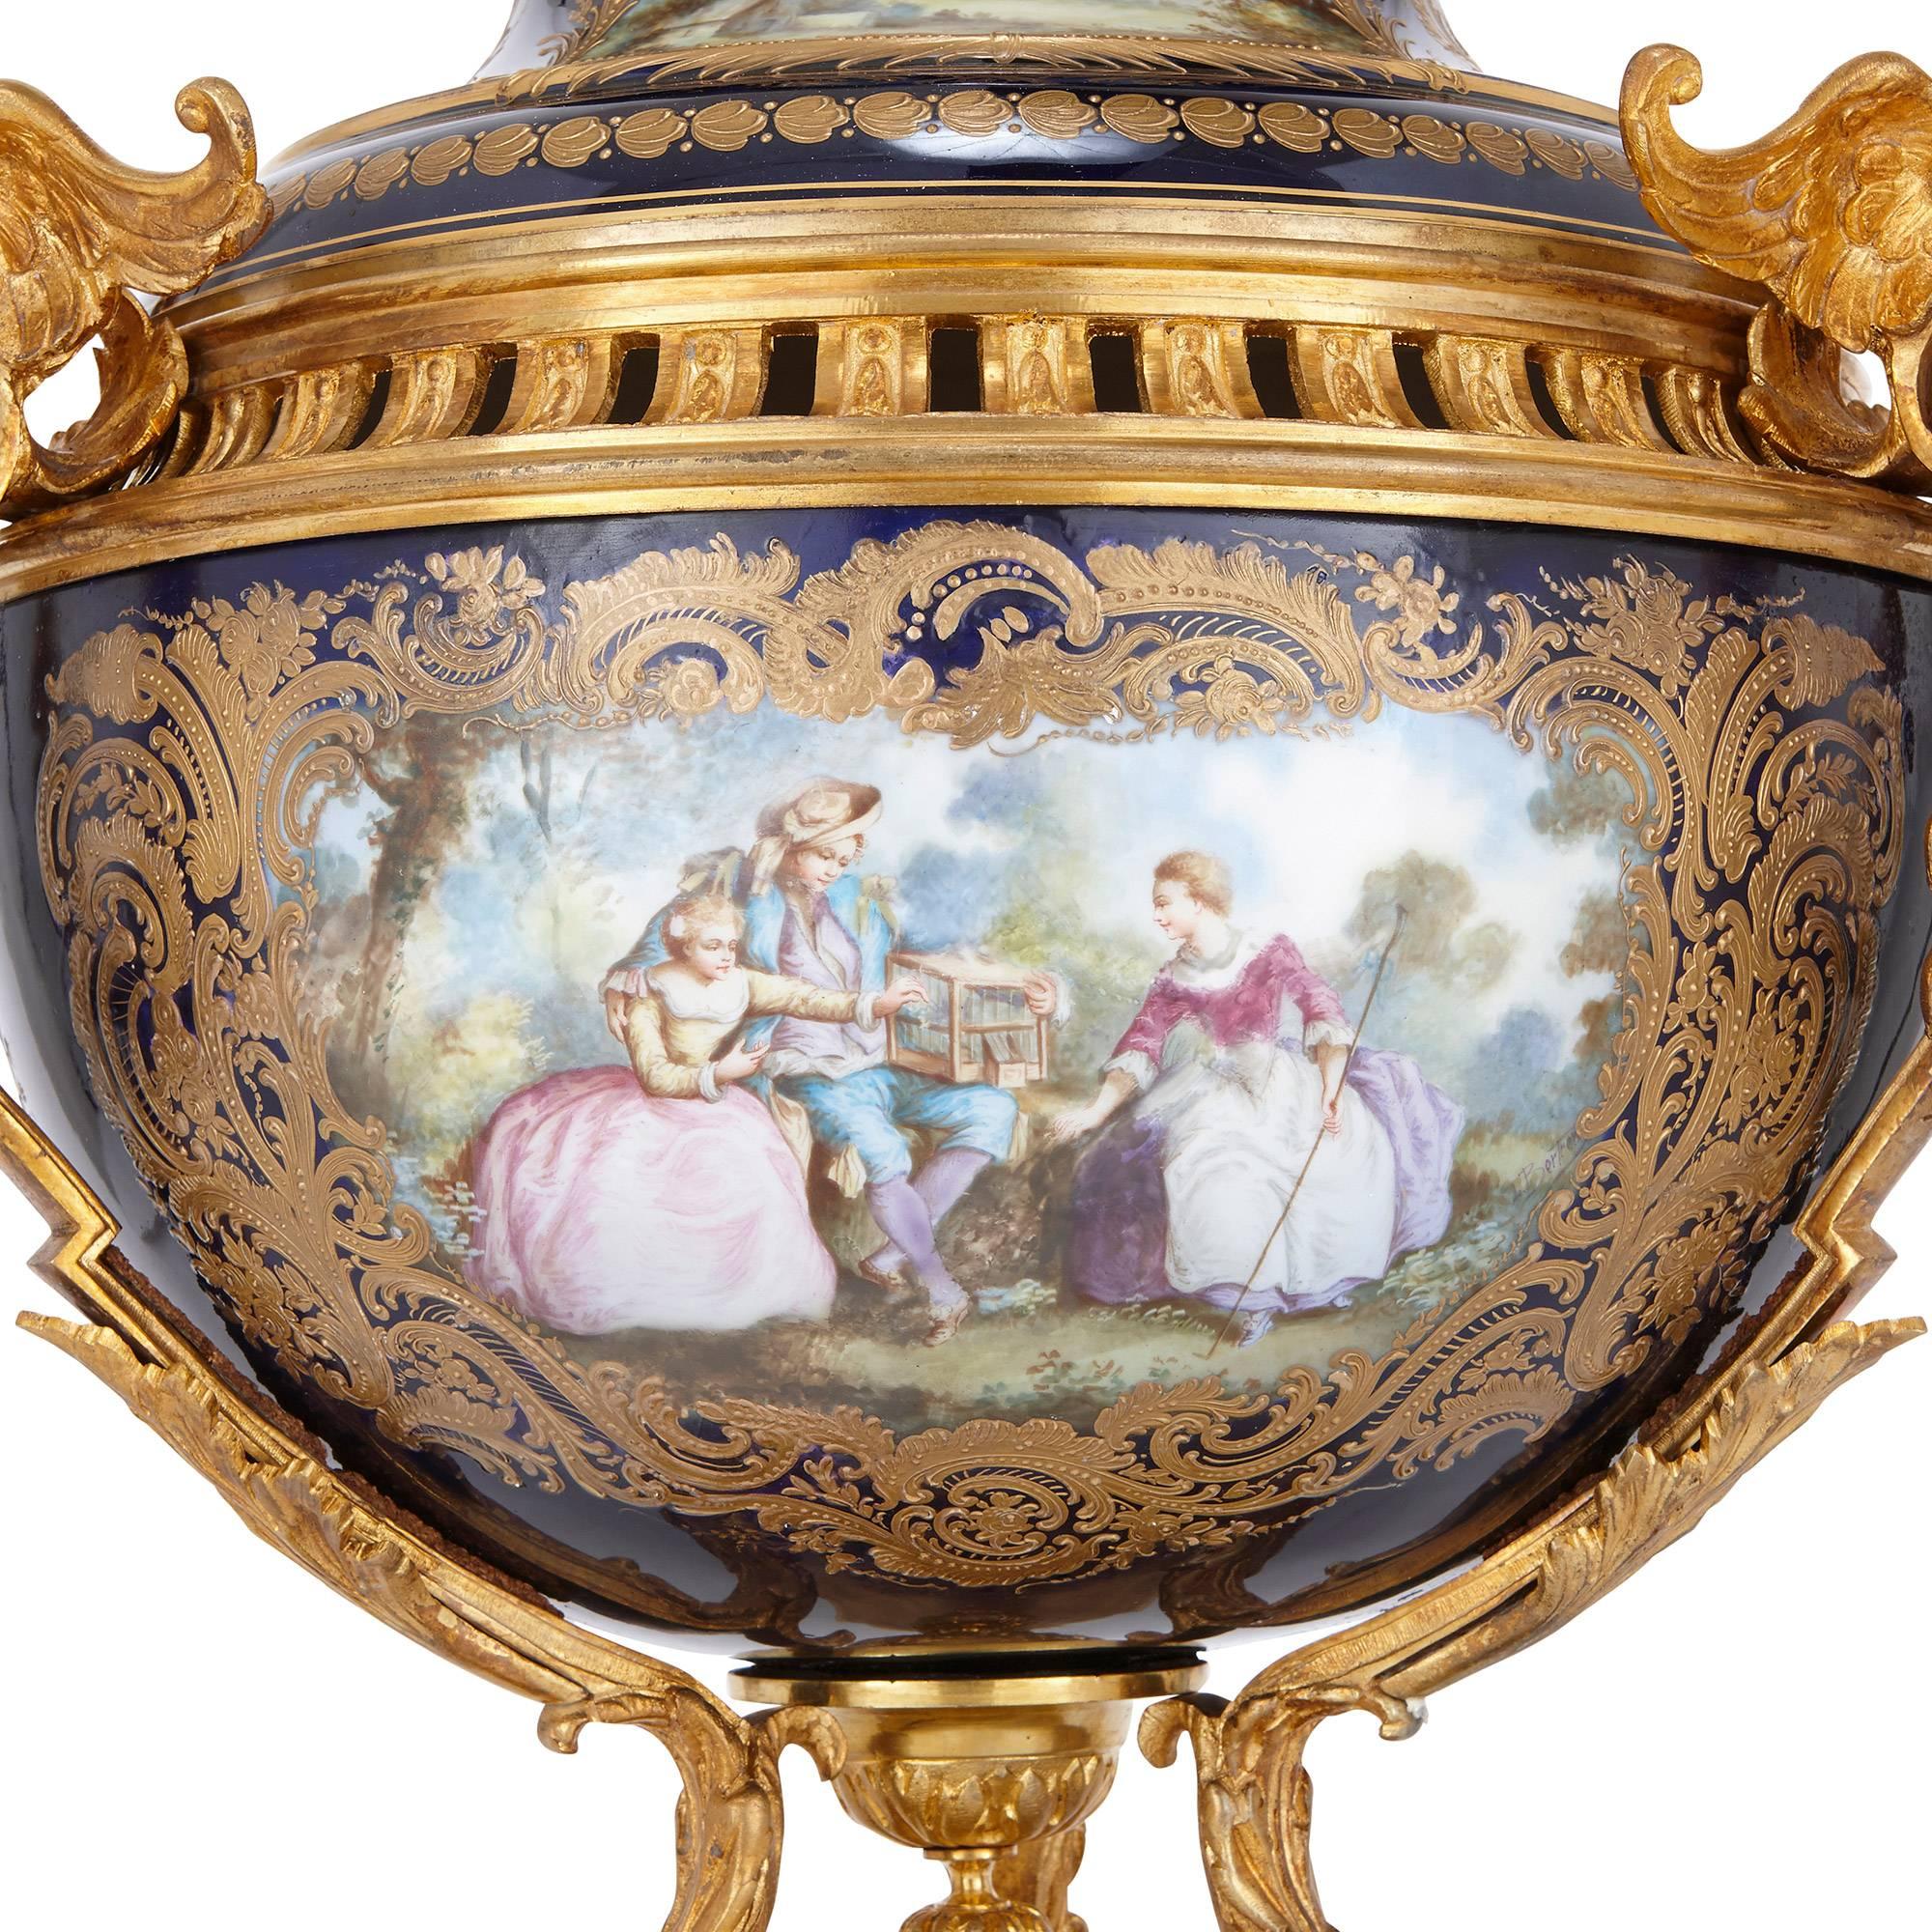 Louis XVI Ormolu-Mounted Sèvres Style Porcelain Vase and Cover